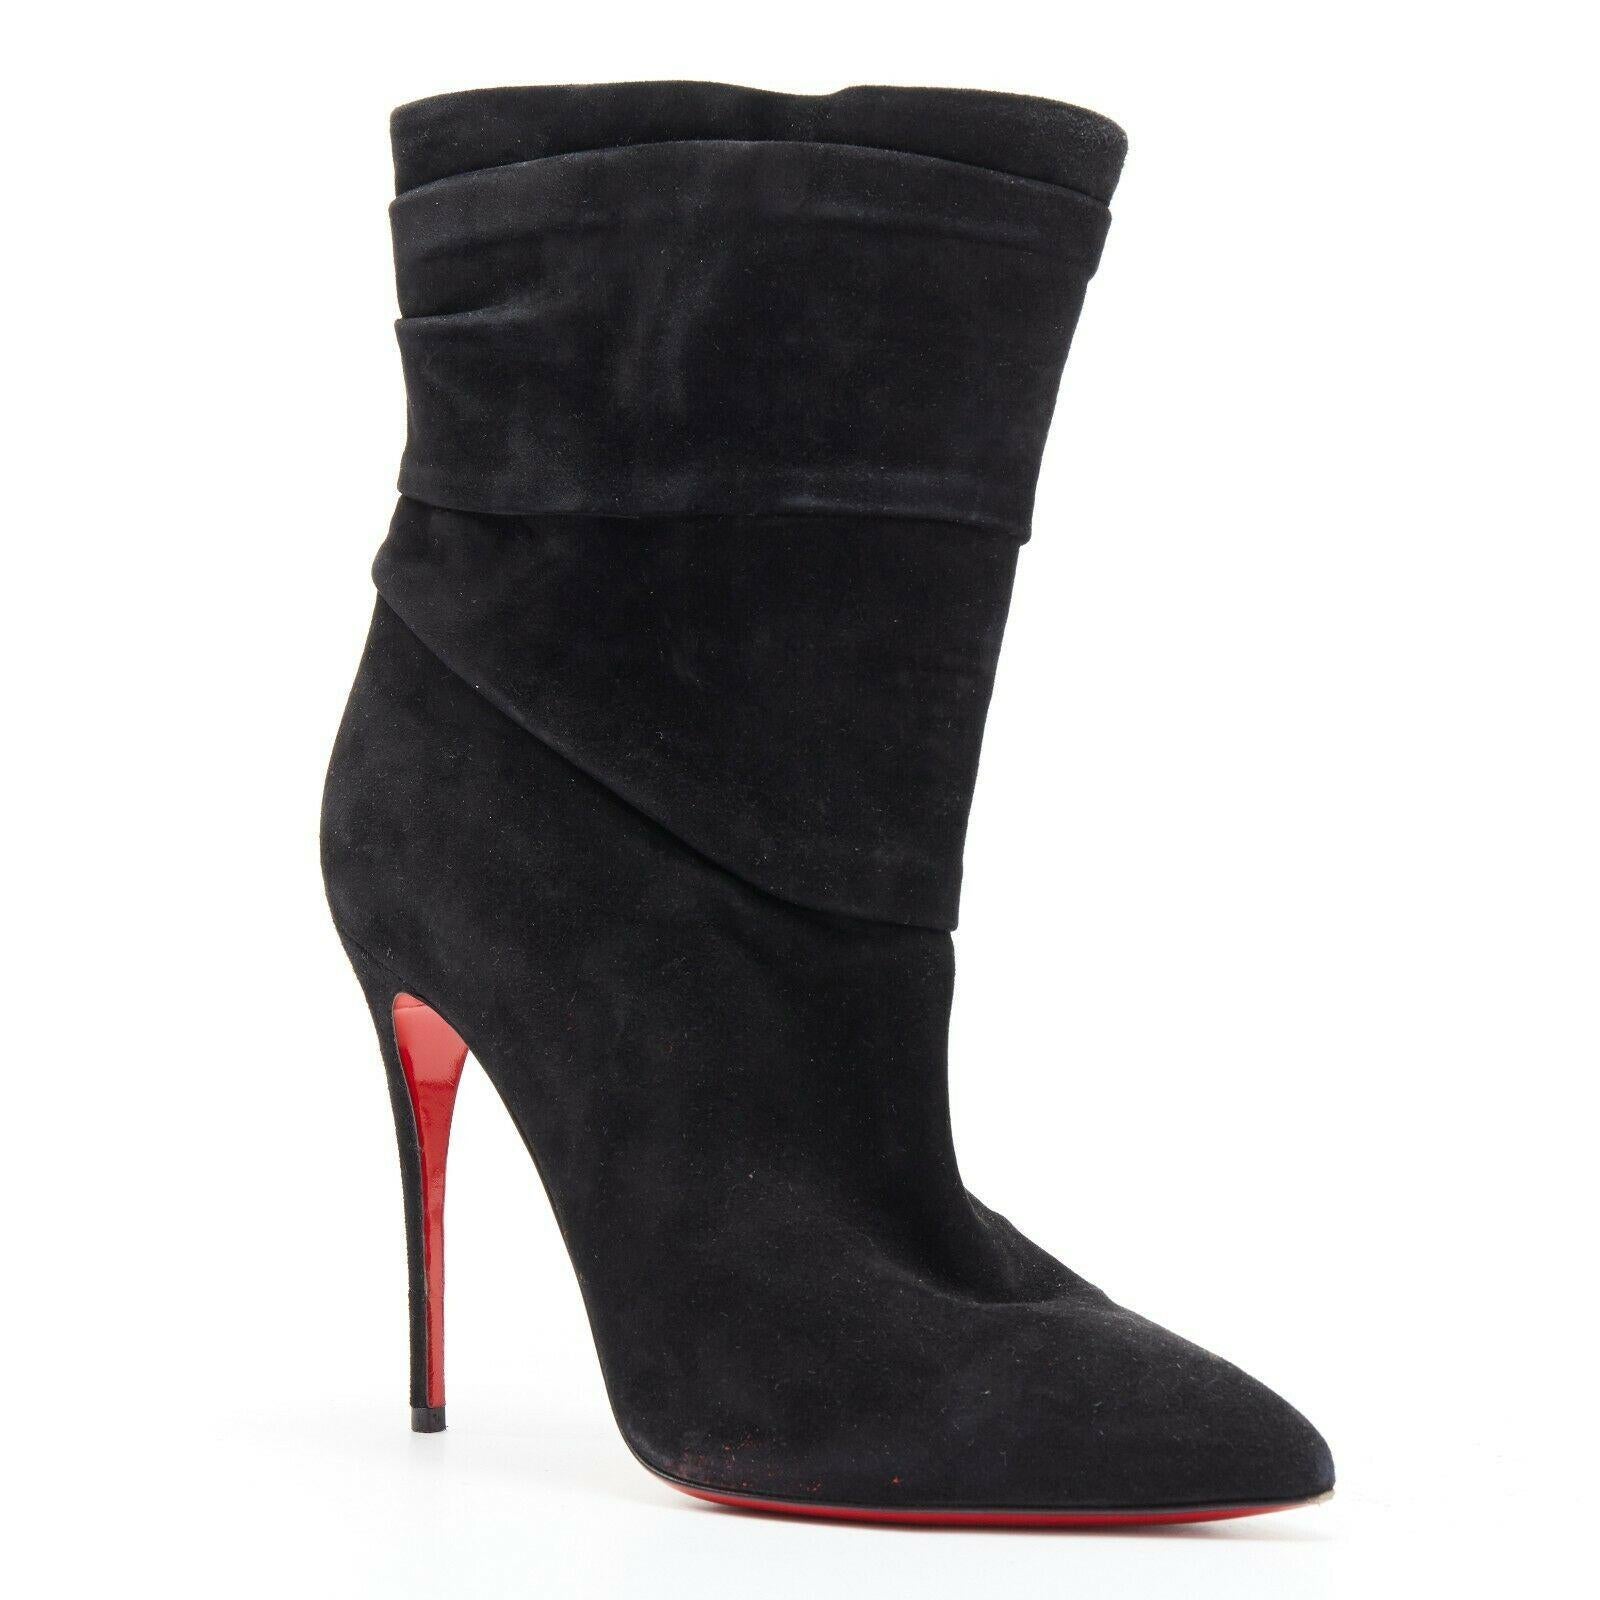 CHRISTIAN LOUBOUTIN Ishtar 100 black suede pointed toe ruched heel boot EU39

CHRISTIAN LOUBOUTIN
Ishtar 100. Black suede leather. Ruched detail at shaft opening. Pointed toe. Tonal stitching. Stiletto heel. Wide opening. Padded tan leather lining.